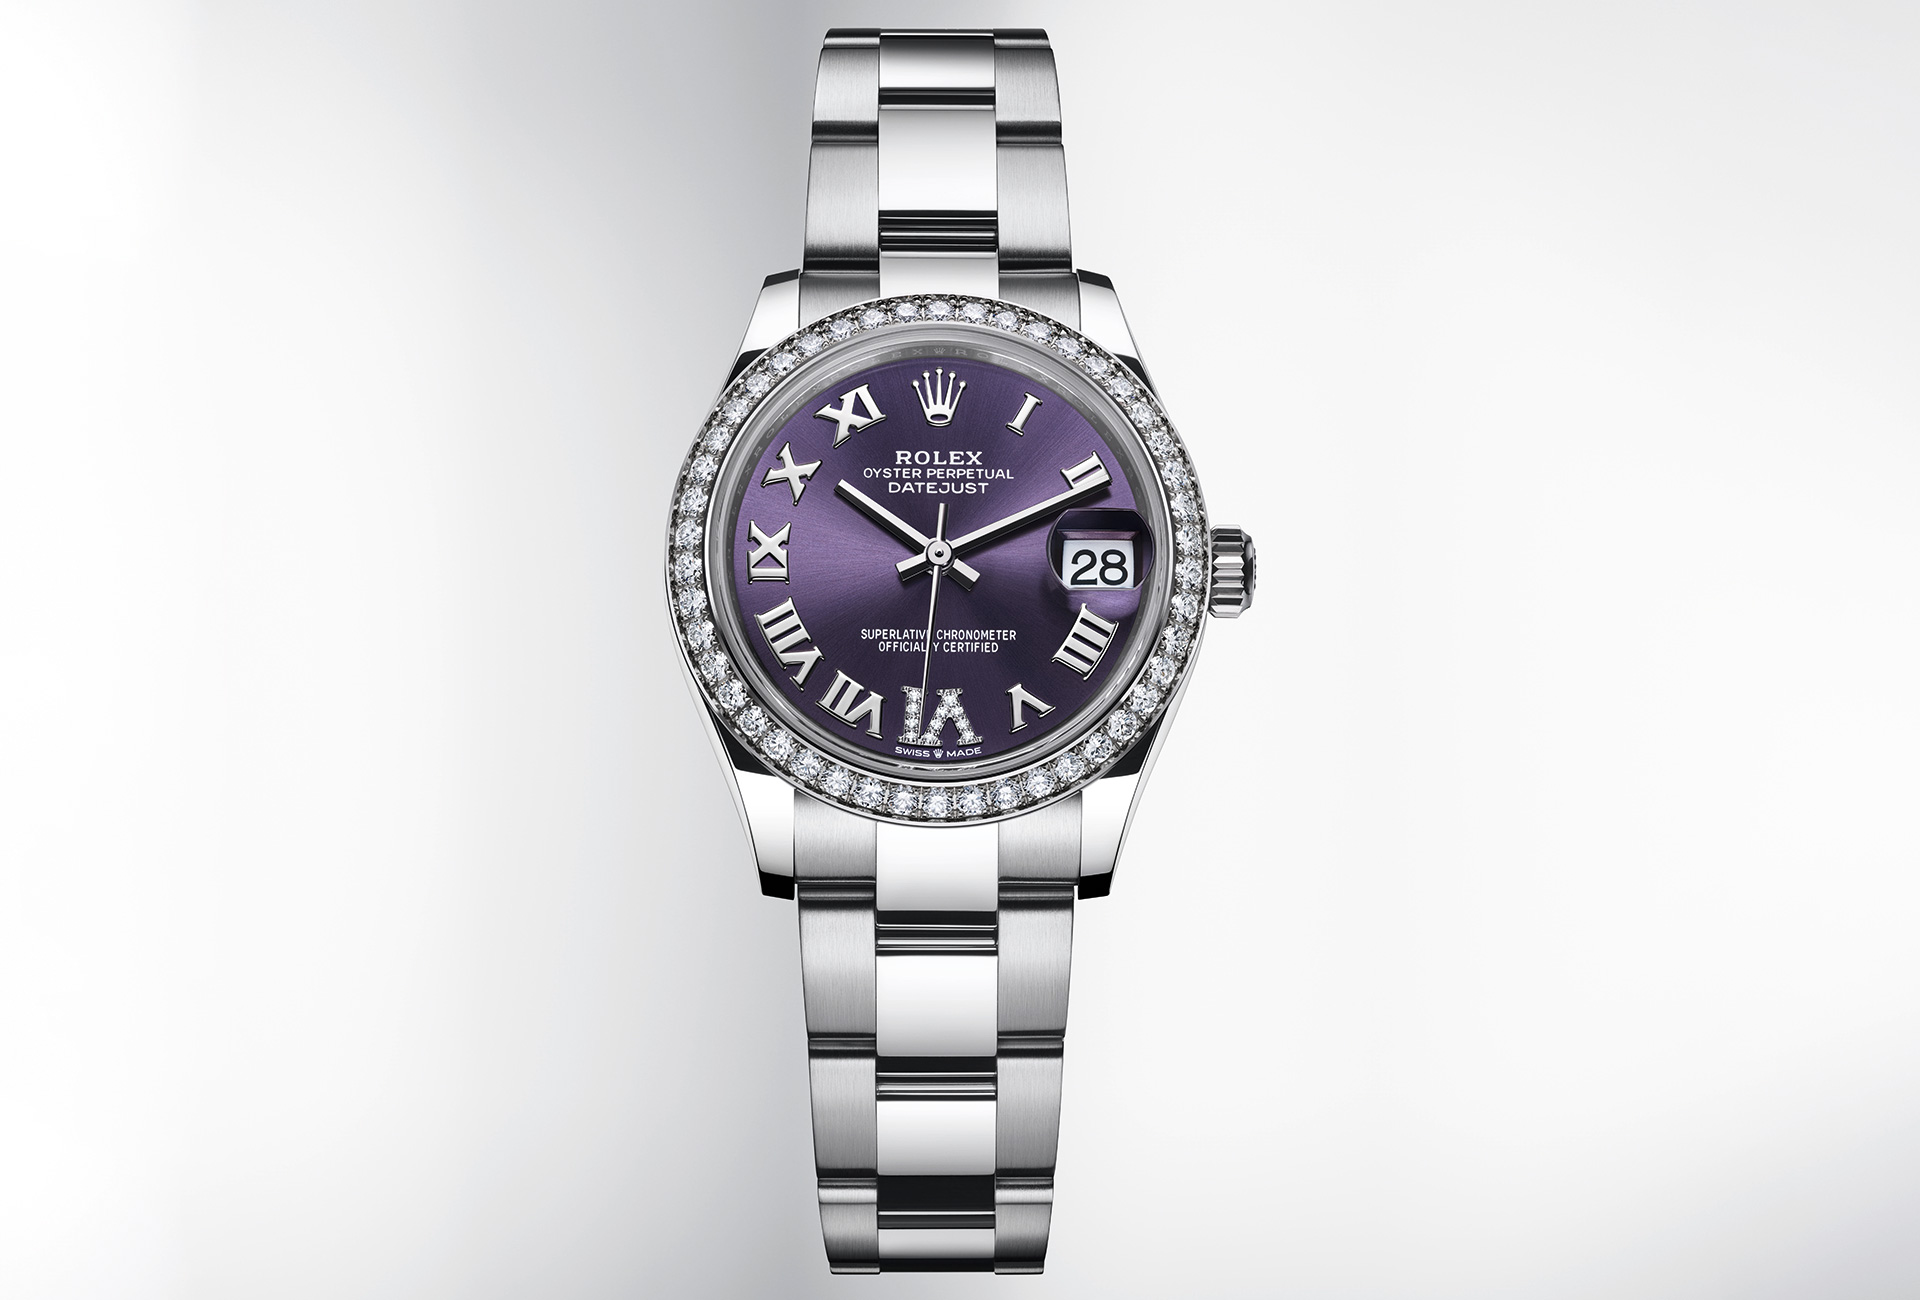 New Rolex Datejust 31 in Rolesor – FHH 